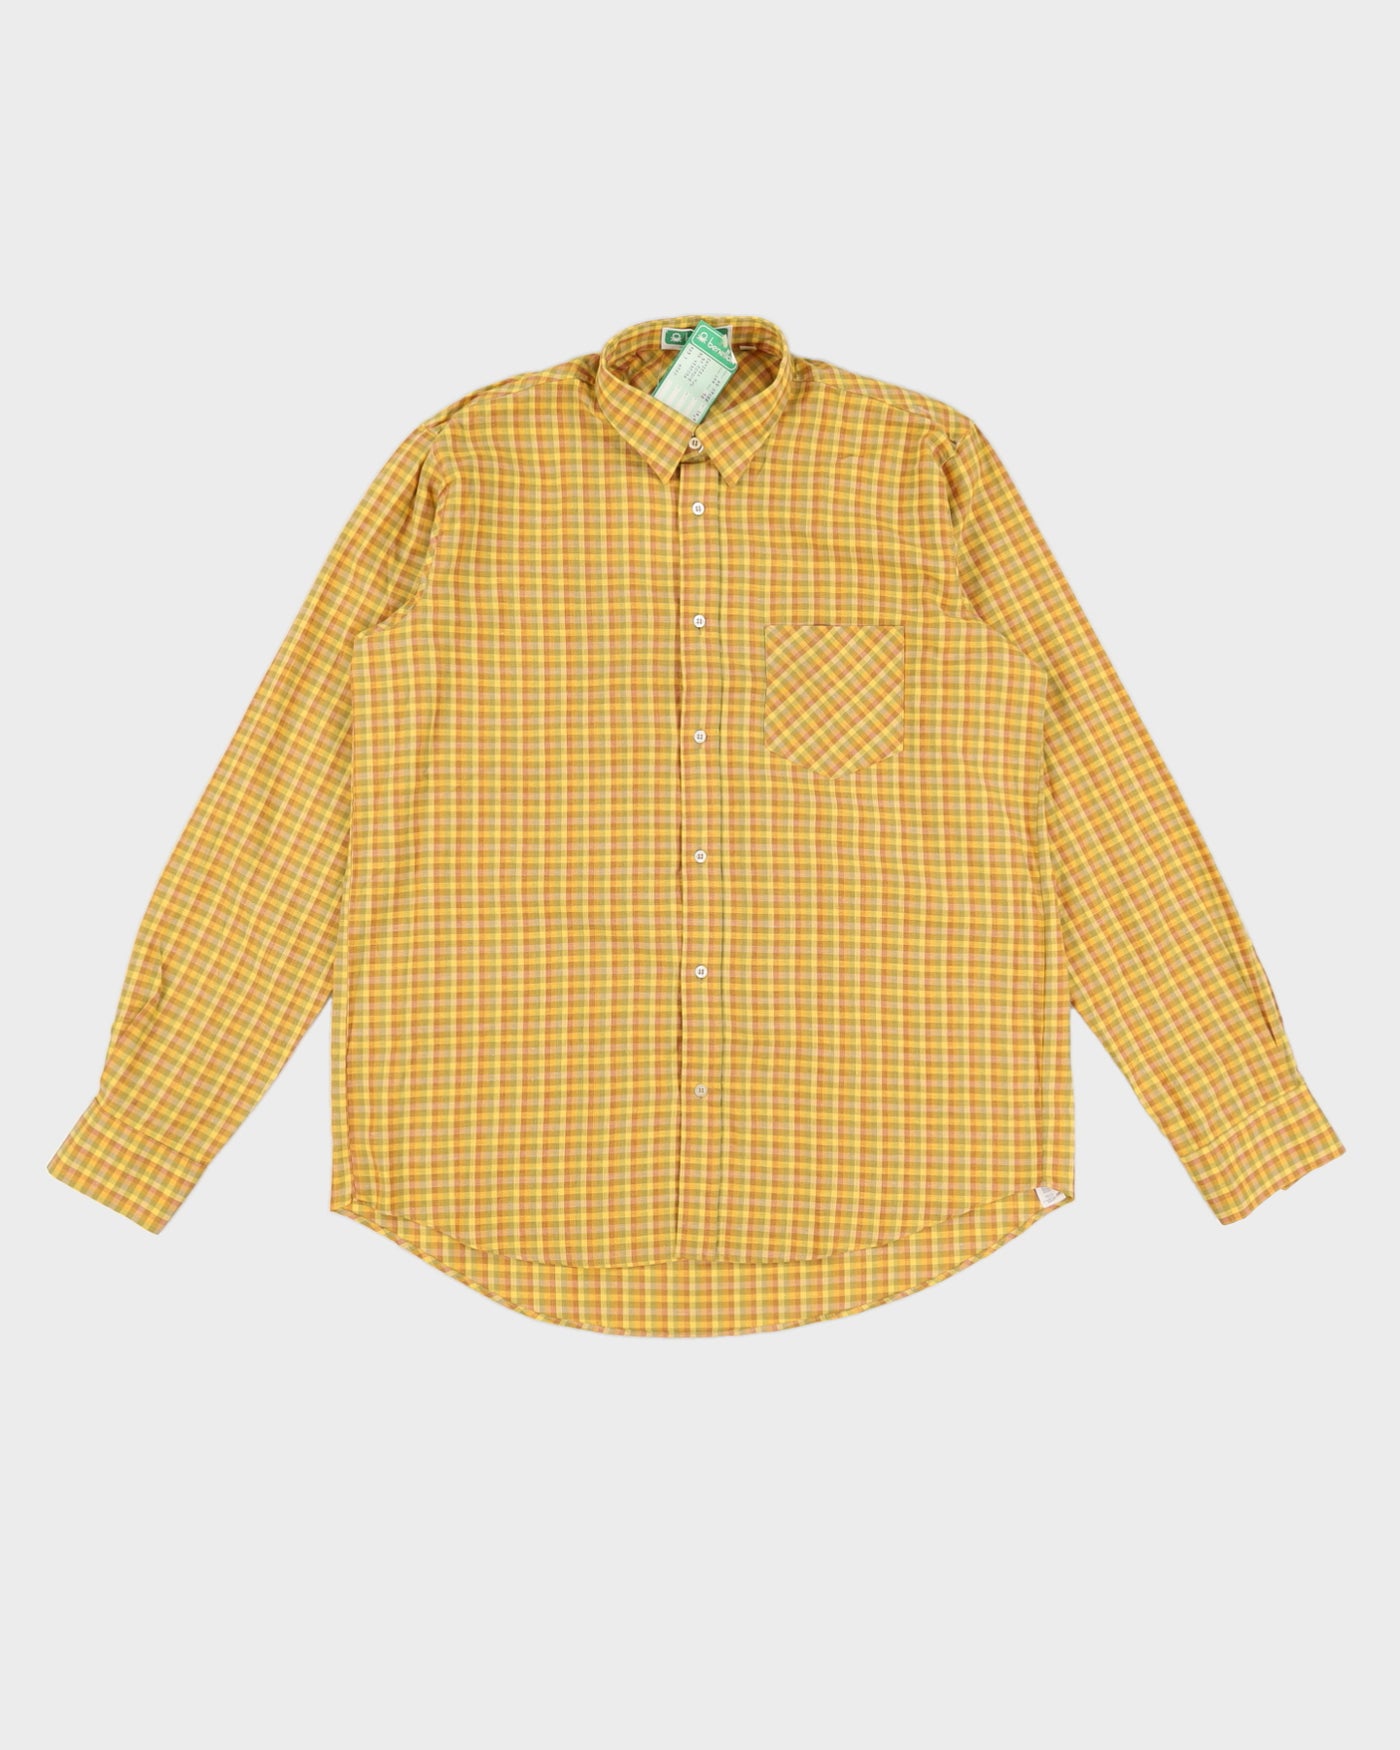 Vintage 70s Benetton Yellow Checked Long Sleeved Shirt Deadstock With Tags - XL